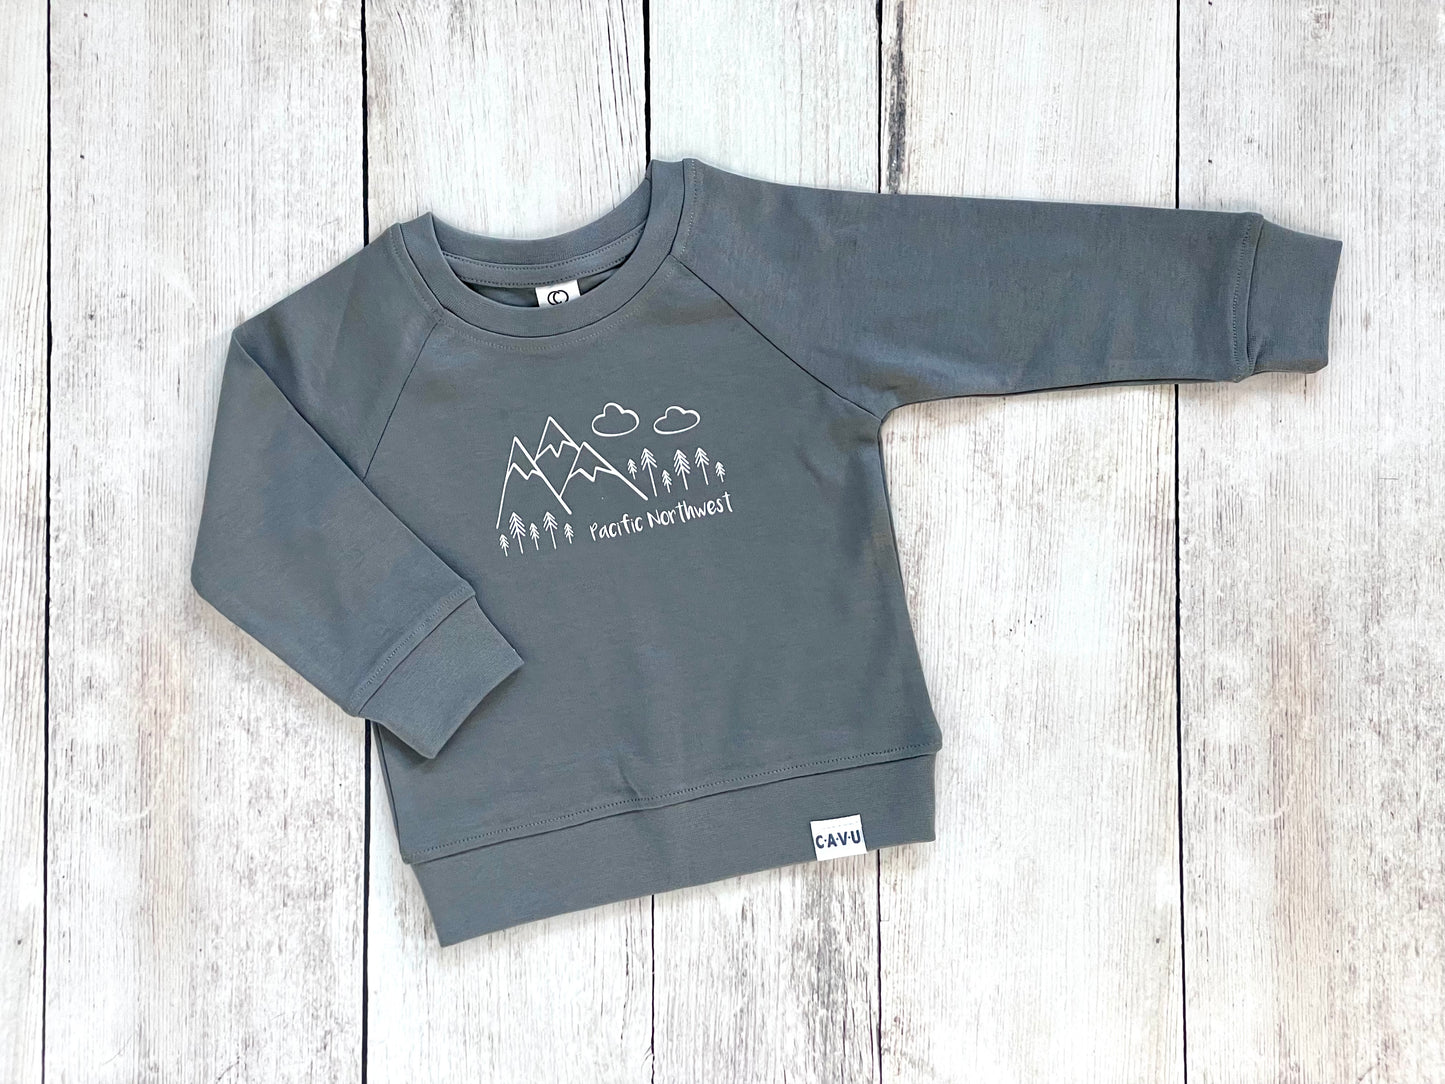 Pacific Northwest Organic Cotton Pullover - Charcoal Gray / White